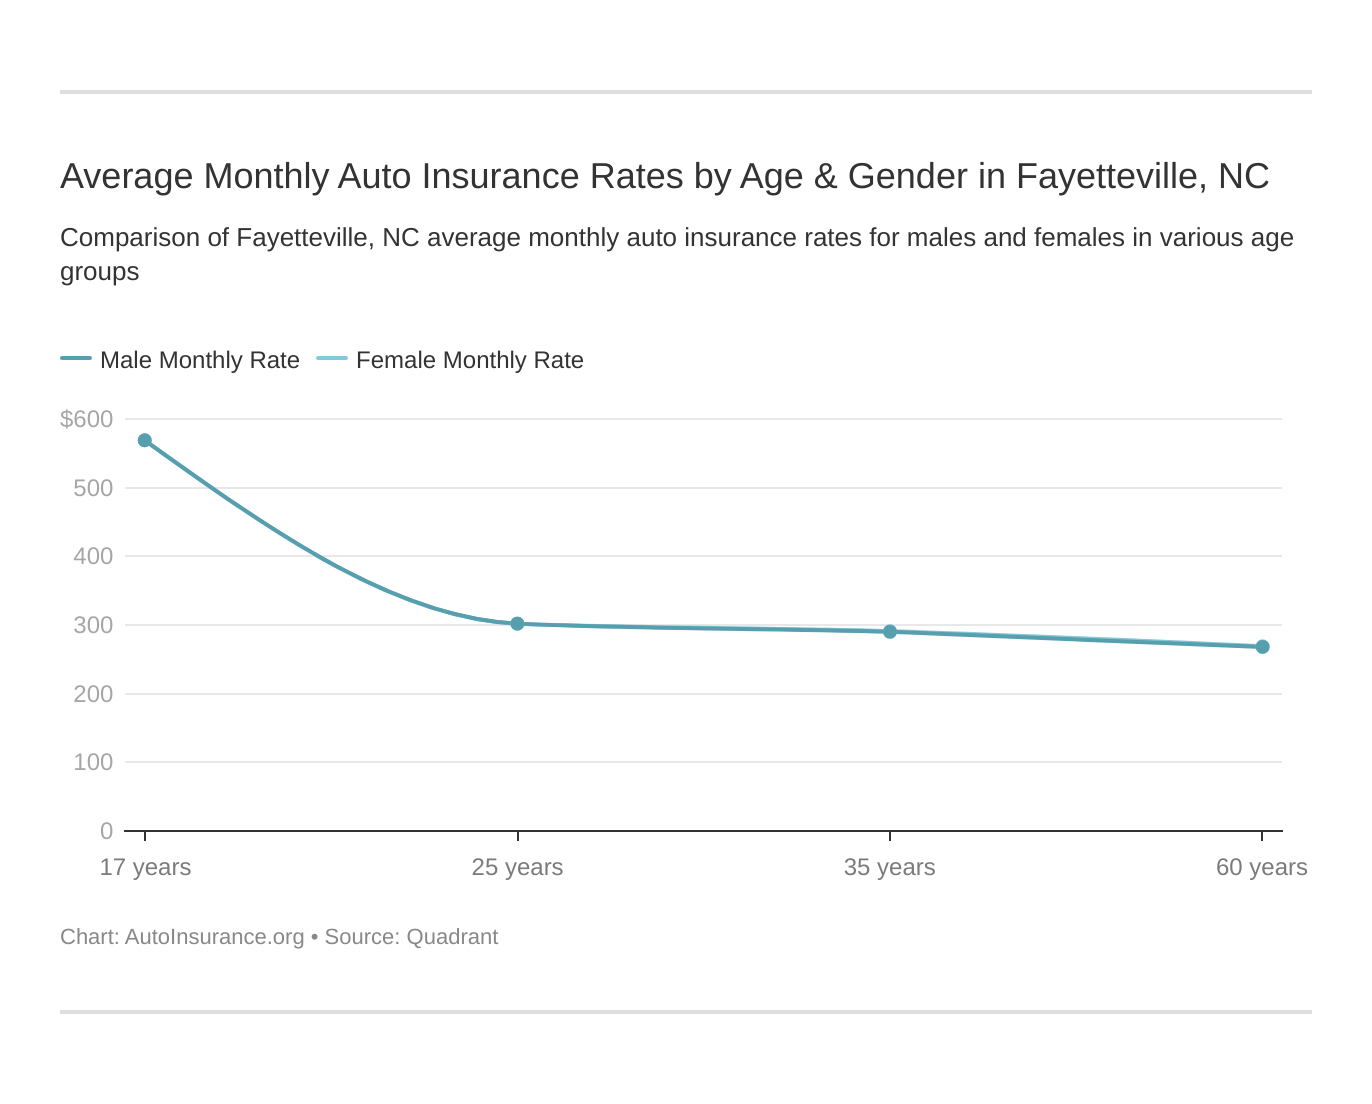 Average Monthly Auto Insurance Rates by Age & Gender in Fayetteville, NC